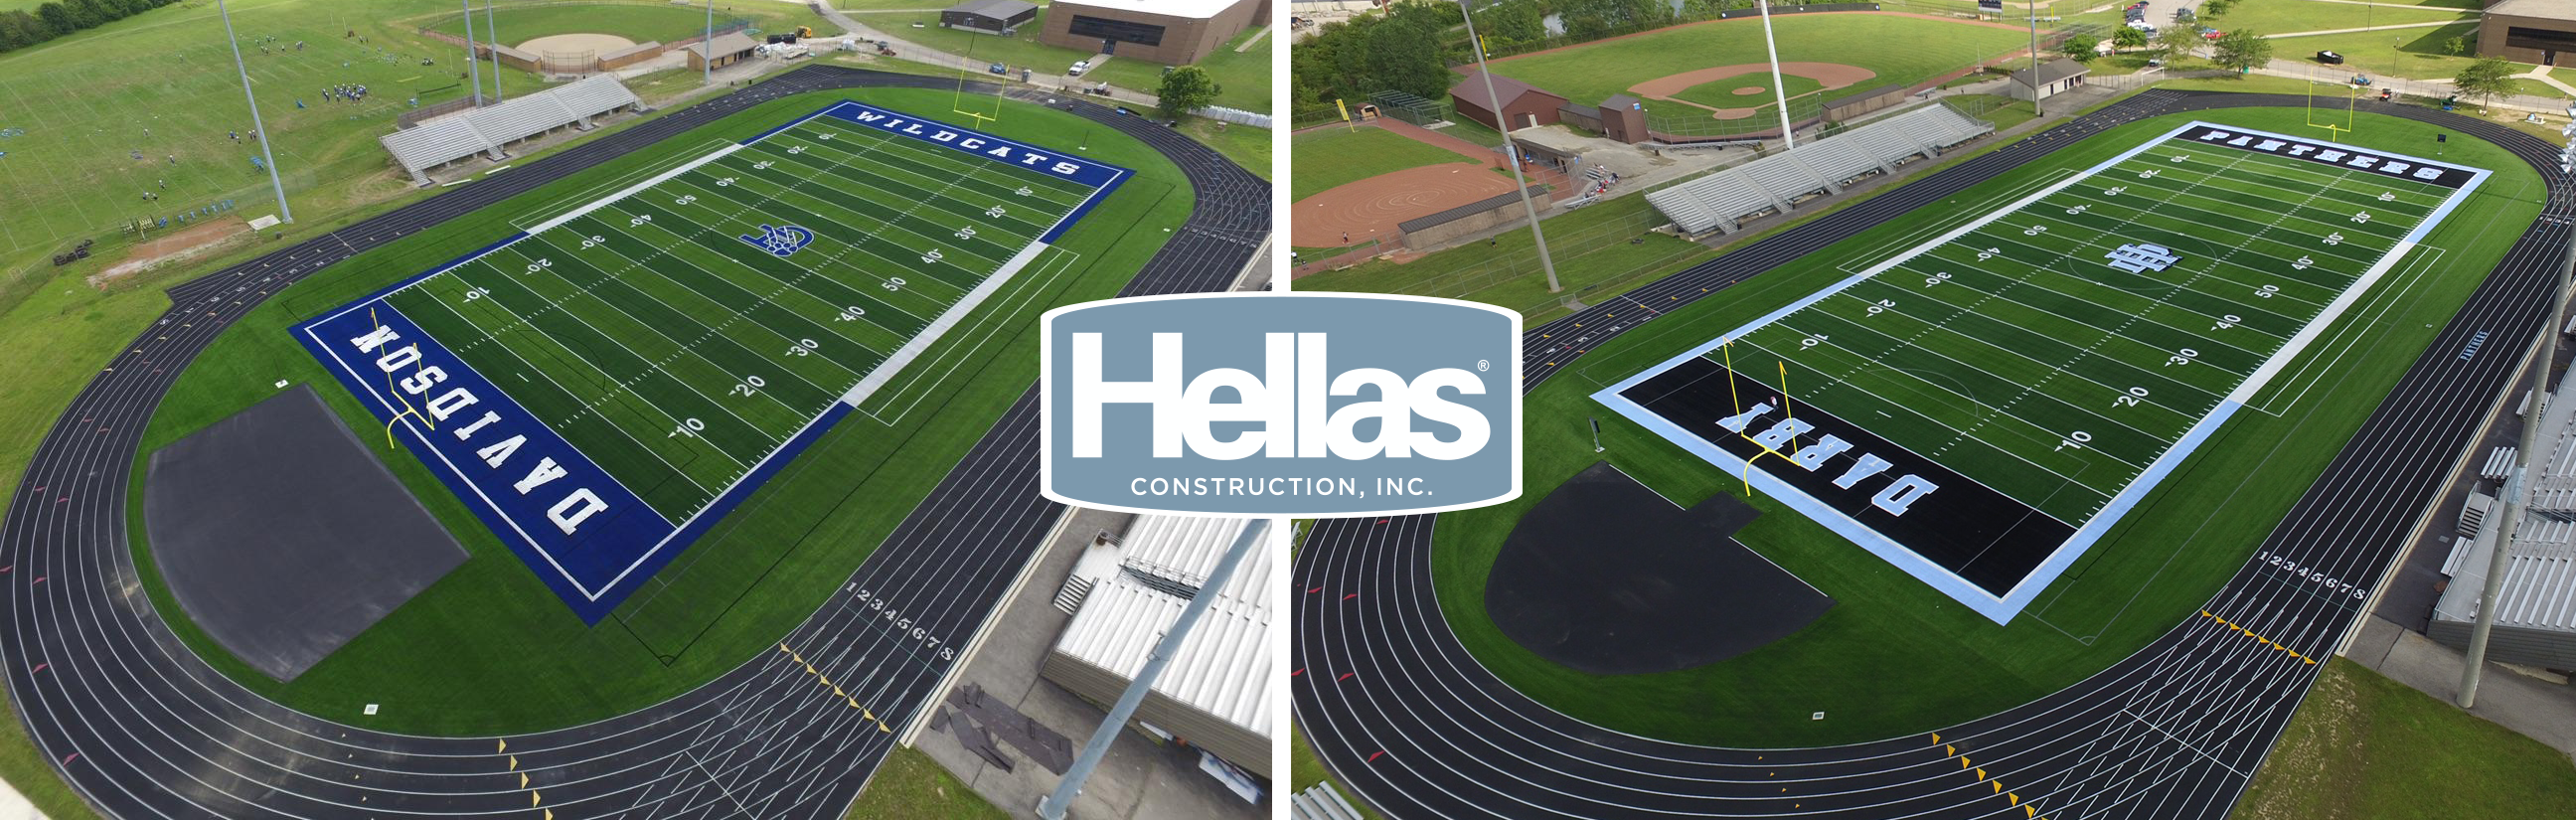 The Darby Panthers and Davidson Wildcats will be playing on Hellas Matrix Turf with Helix Technology this fall.